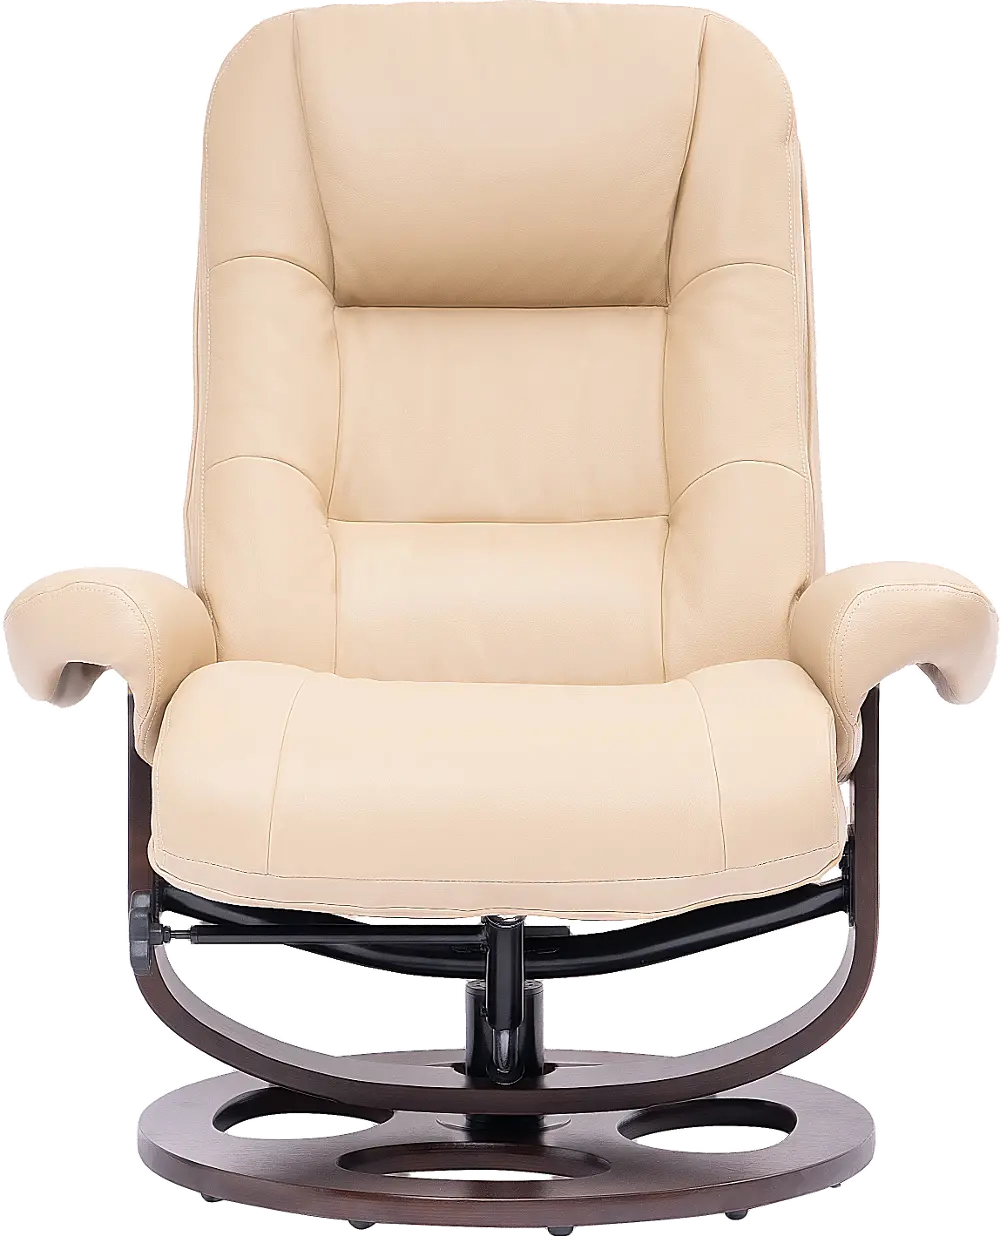 Wasatch Ivory Leather Swivel Recliner with Matching Ottoman-1